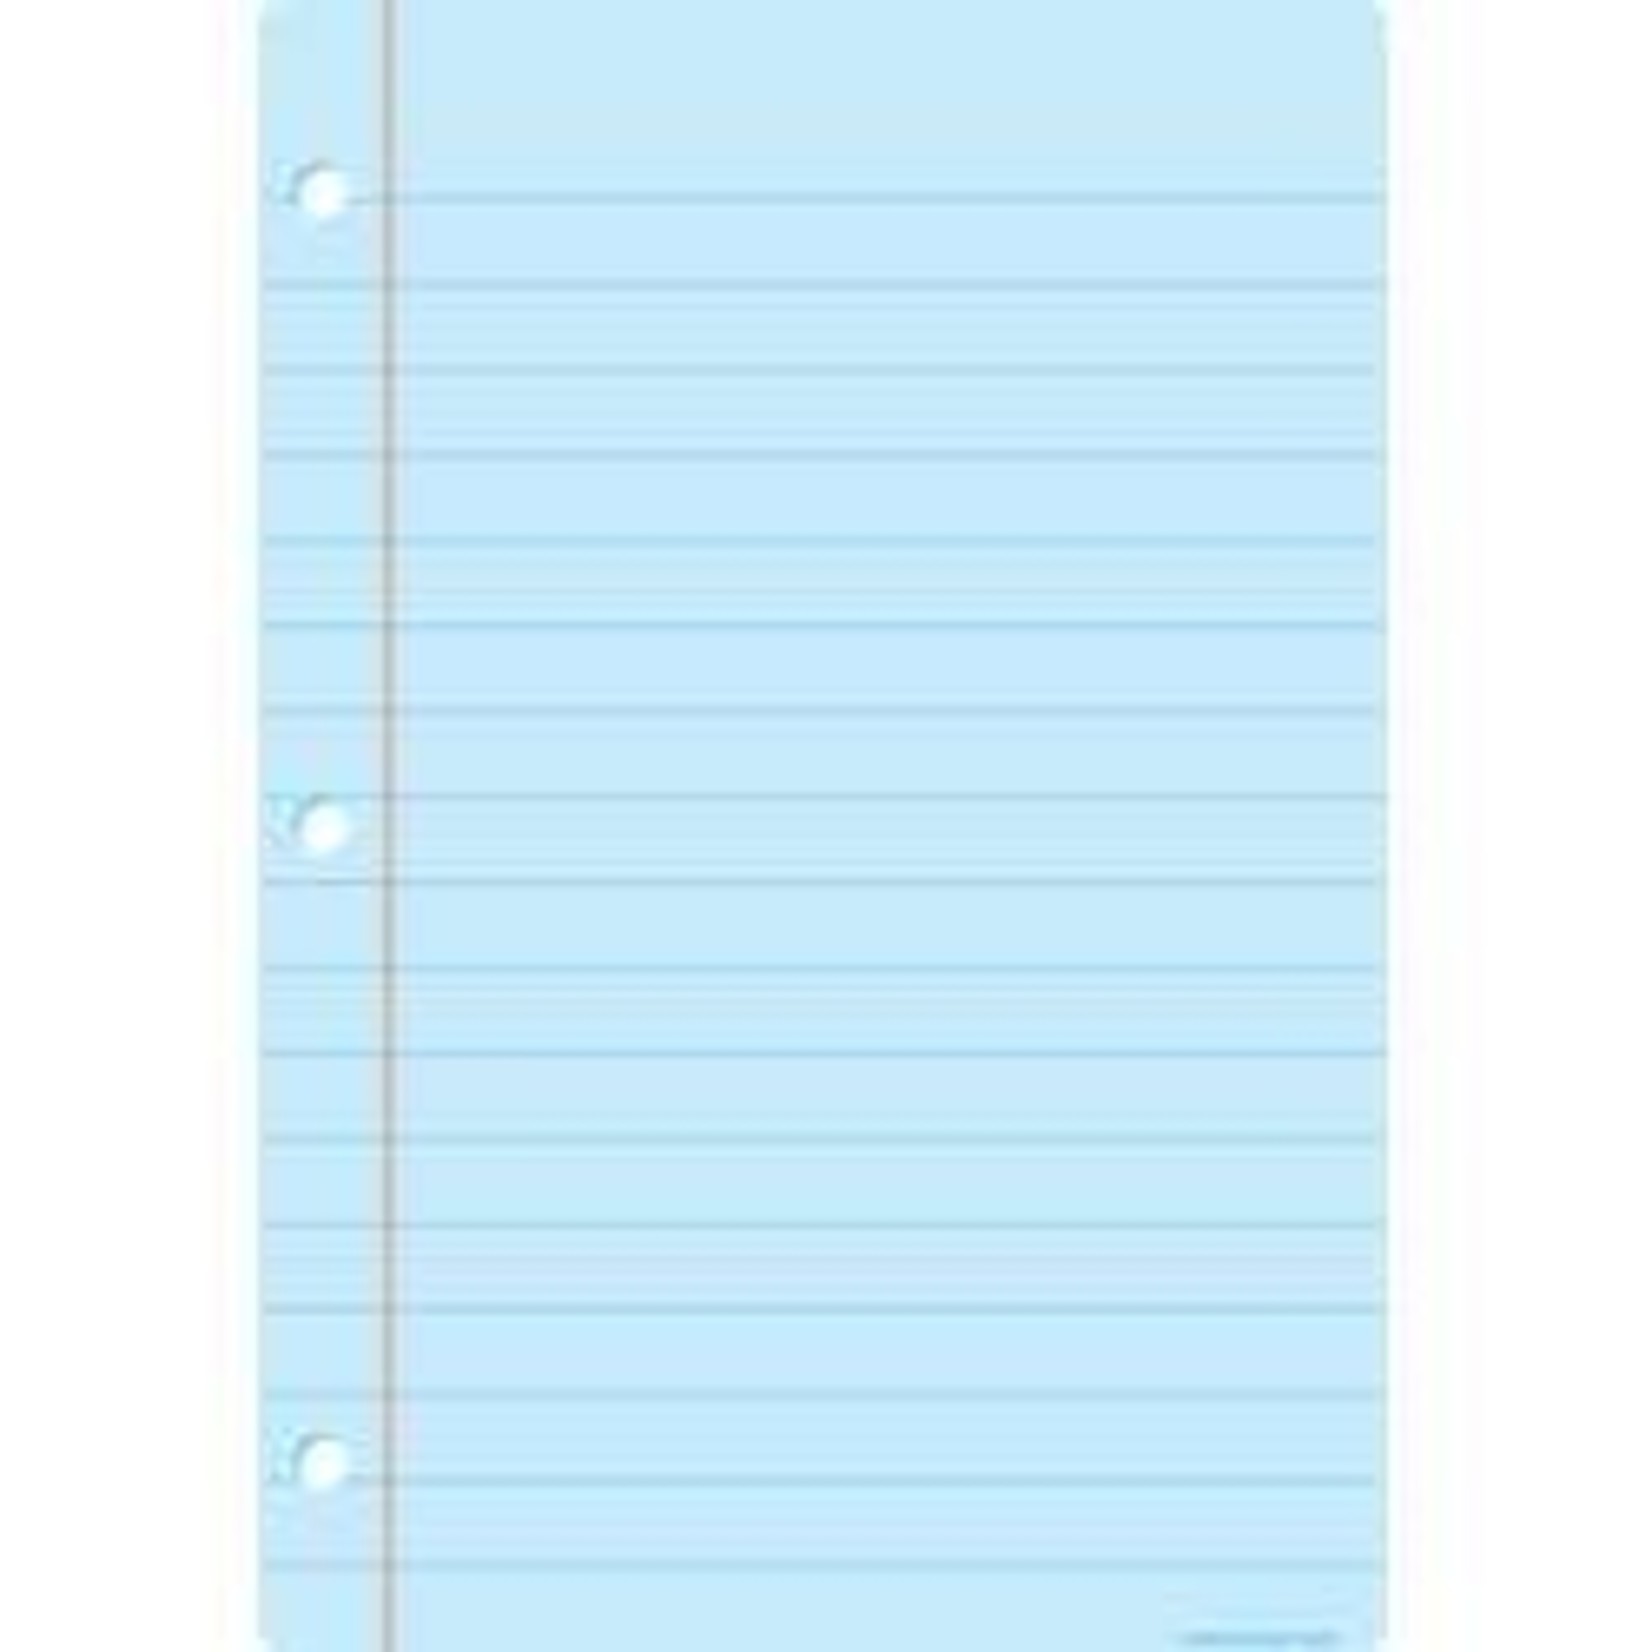 ASHLEY INCORPORATED Smart Poly® Chart 13"X19", Light Blue Notebook Paper